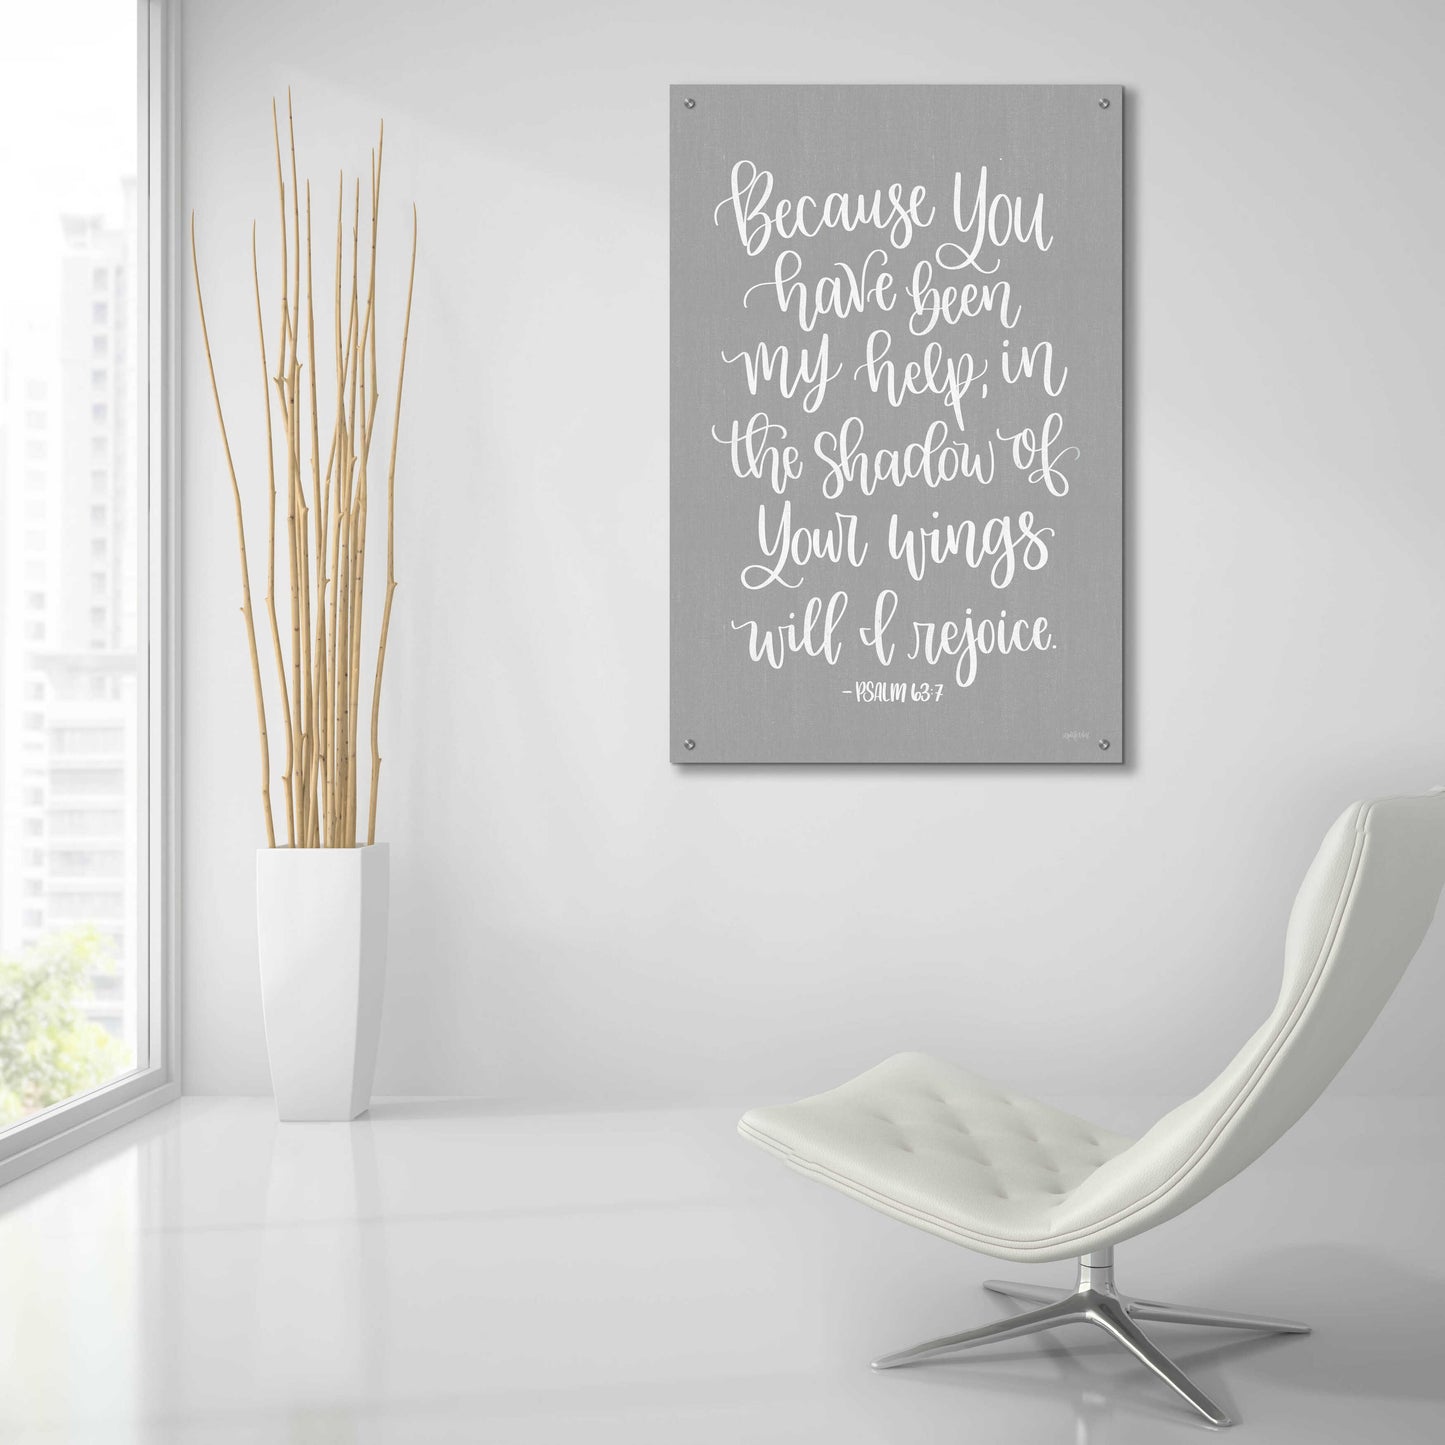 Epic Art 'You Have Been My Help' by Imperfect Dust, Acrylic Glass Wall Art,24x36